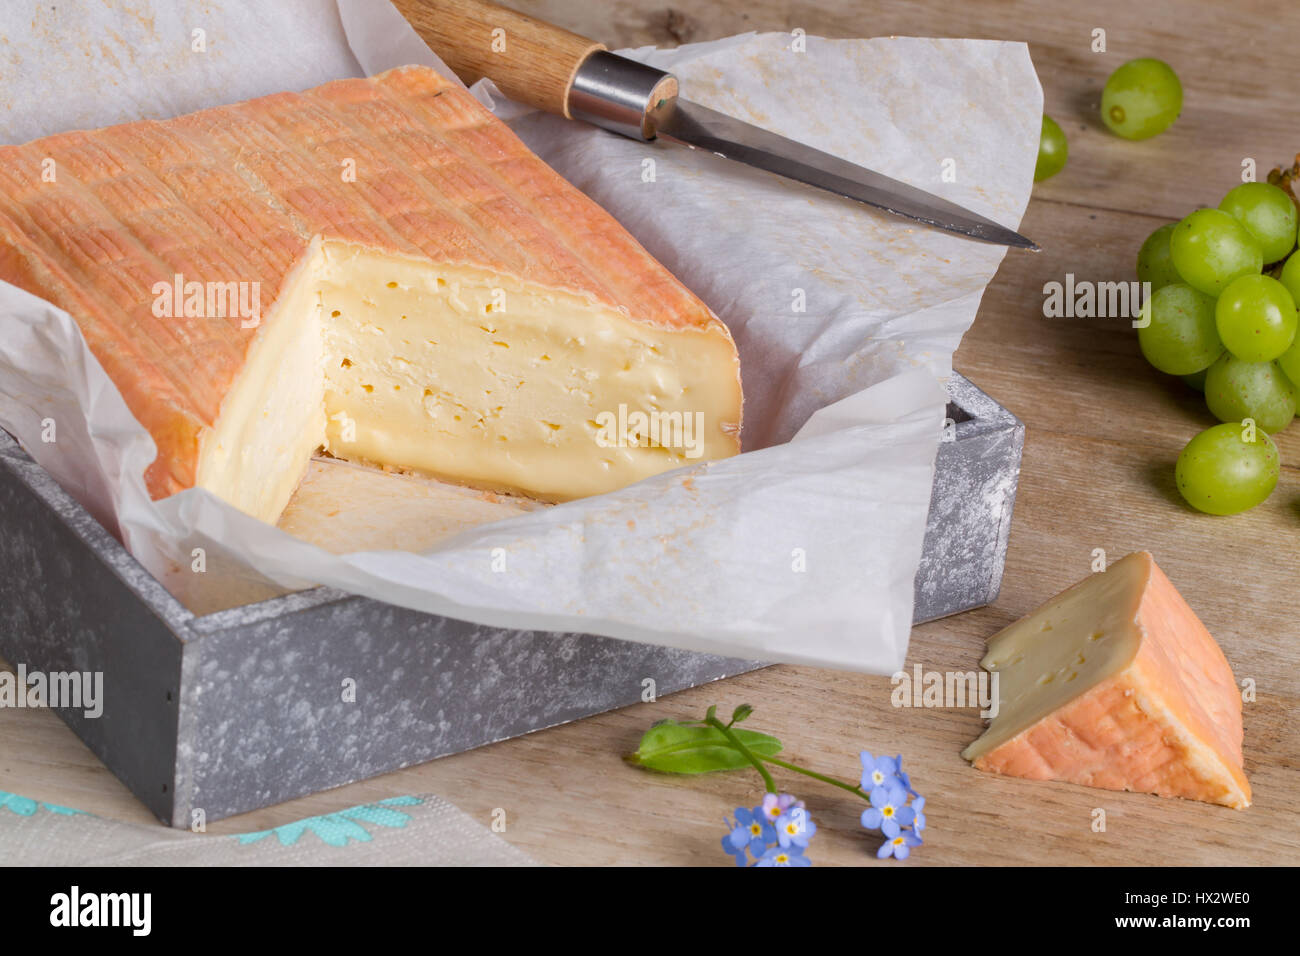 Cheese: Maroilles cheese Stock Photo